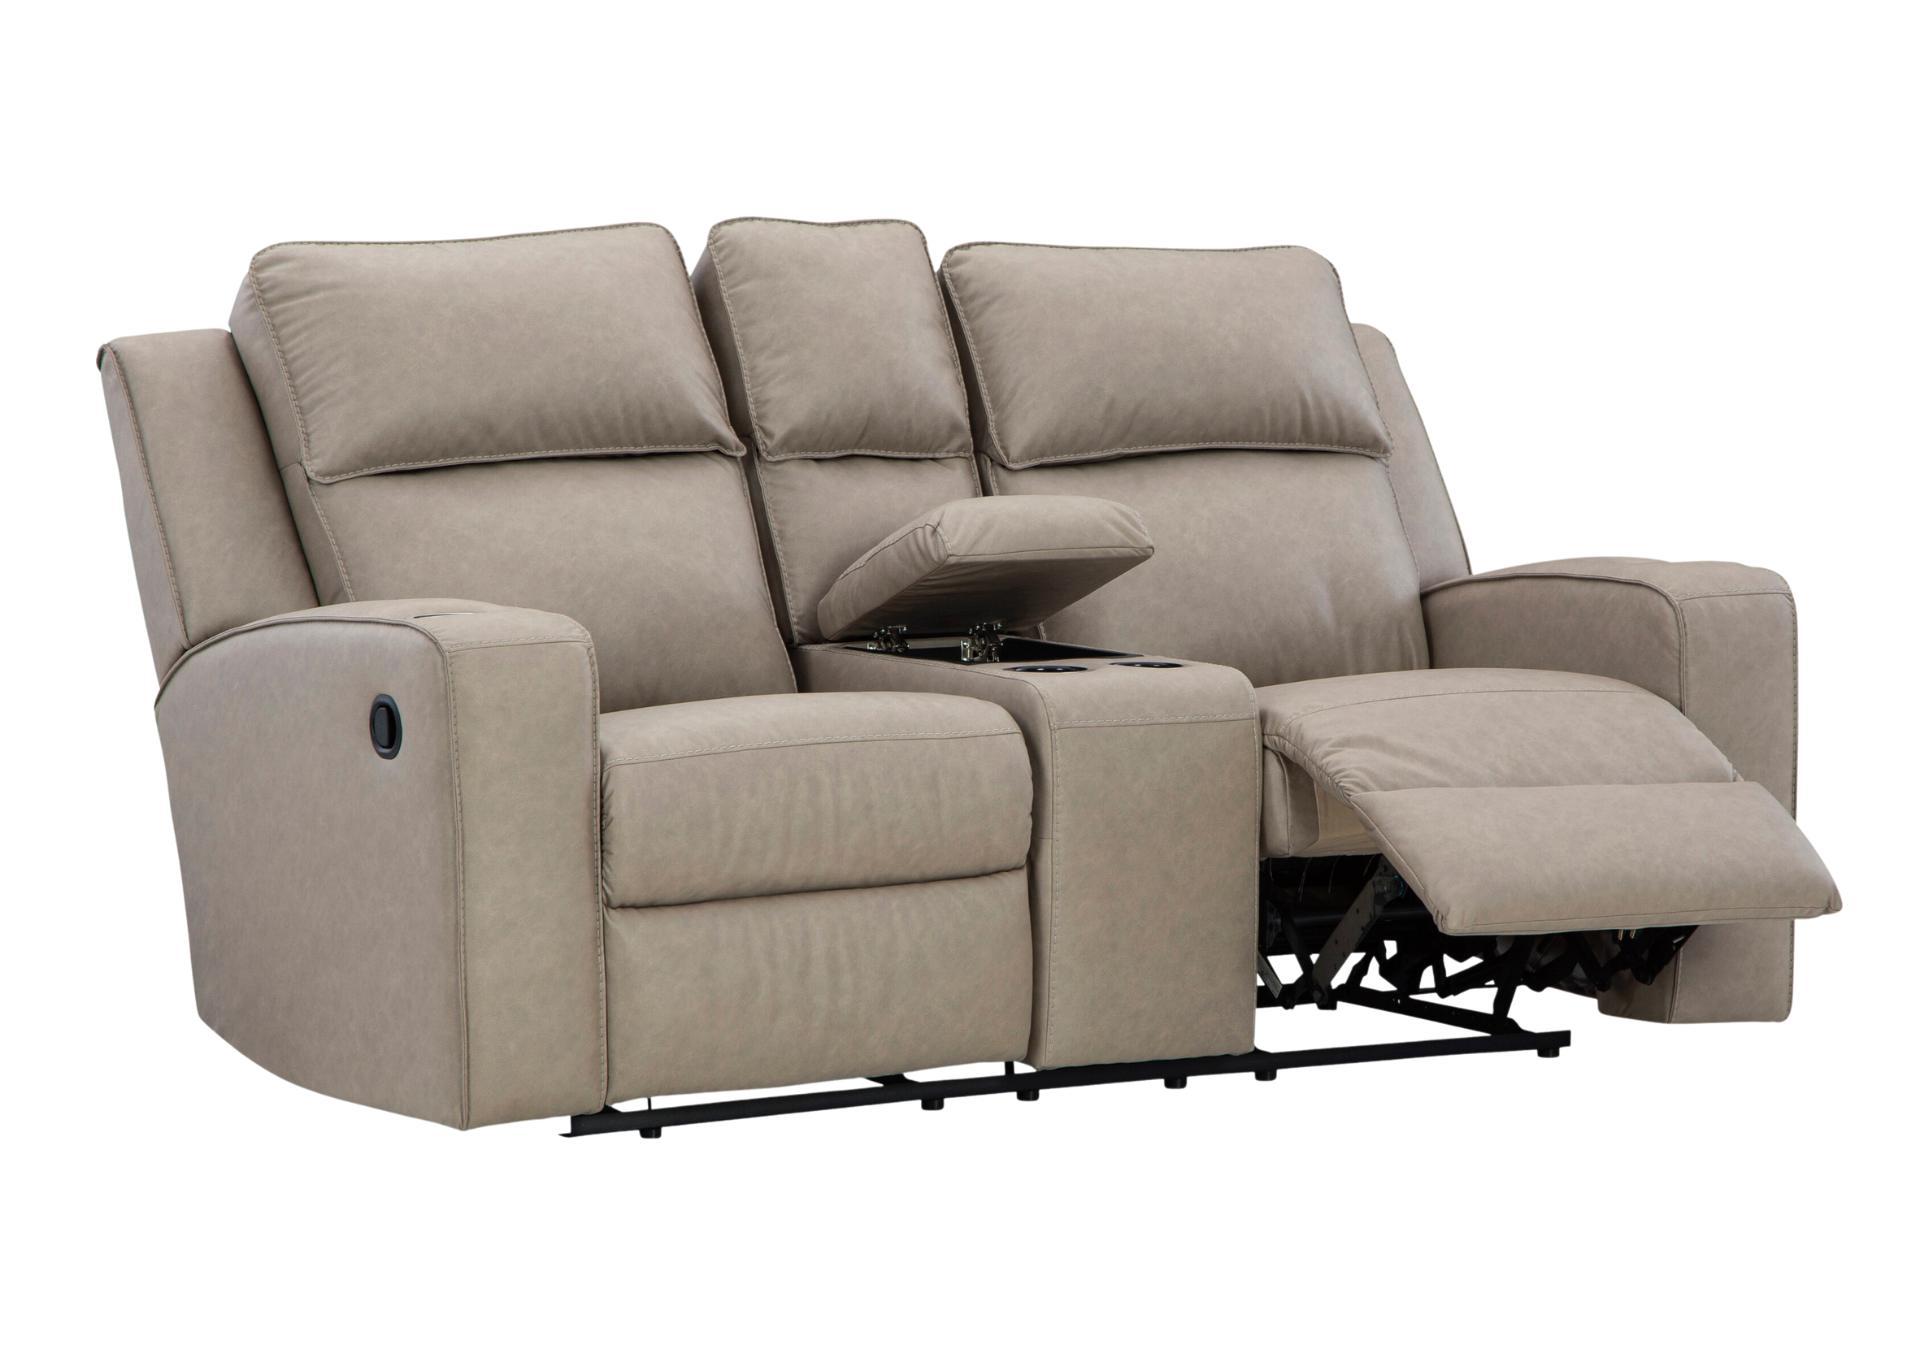 LAVENHORNE PEBBLE RECLINING LOVESEAT WITH CONSOLE,ASHLEY FURNITURE INC.